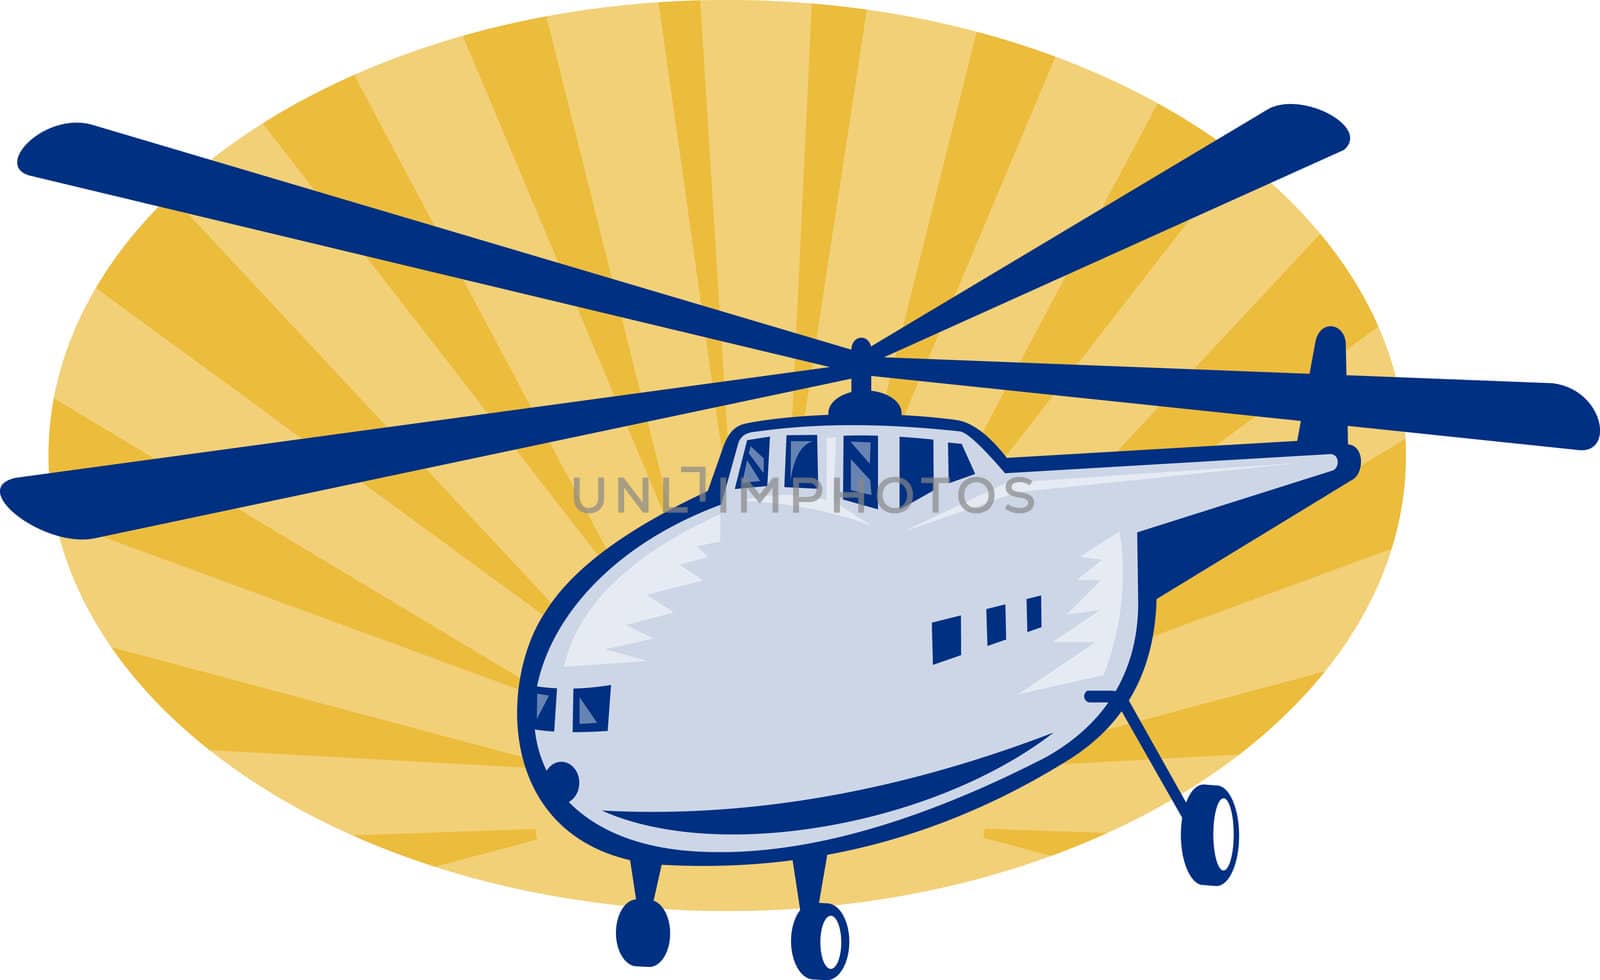 illustration of a Retro style helicopter or chopper